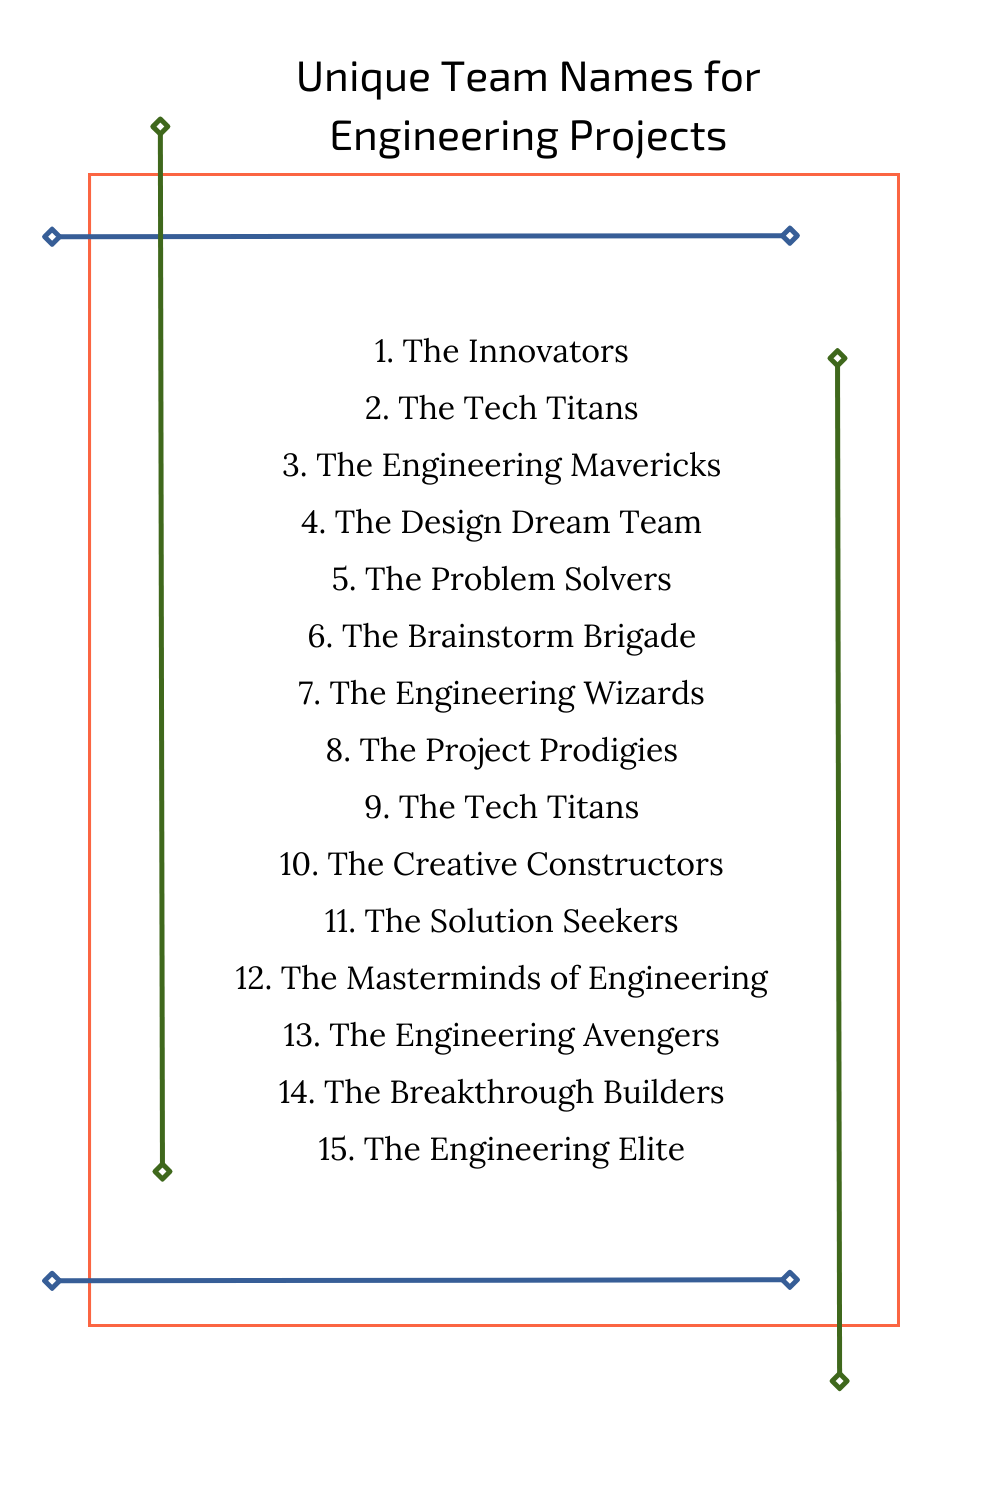 Unique Team Names for Engineering Projects